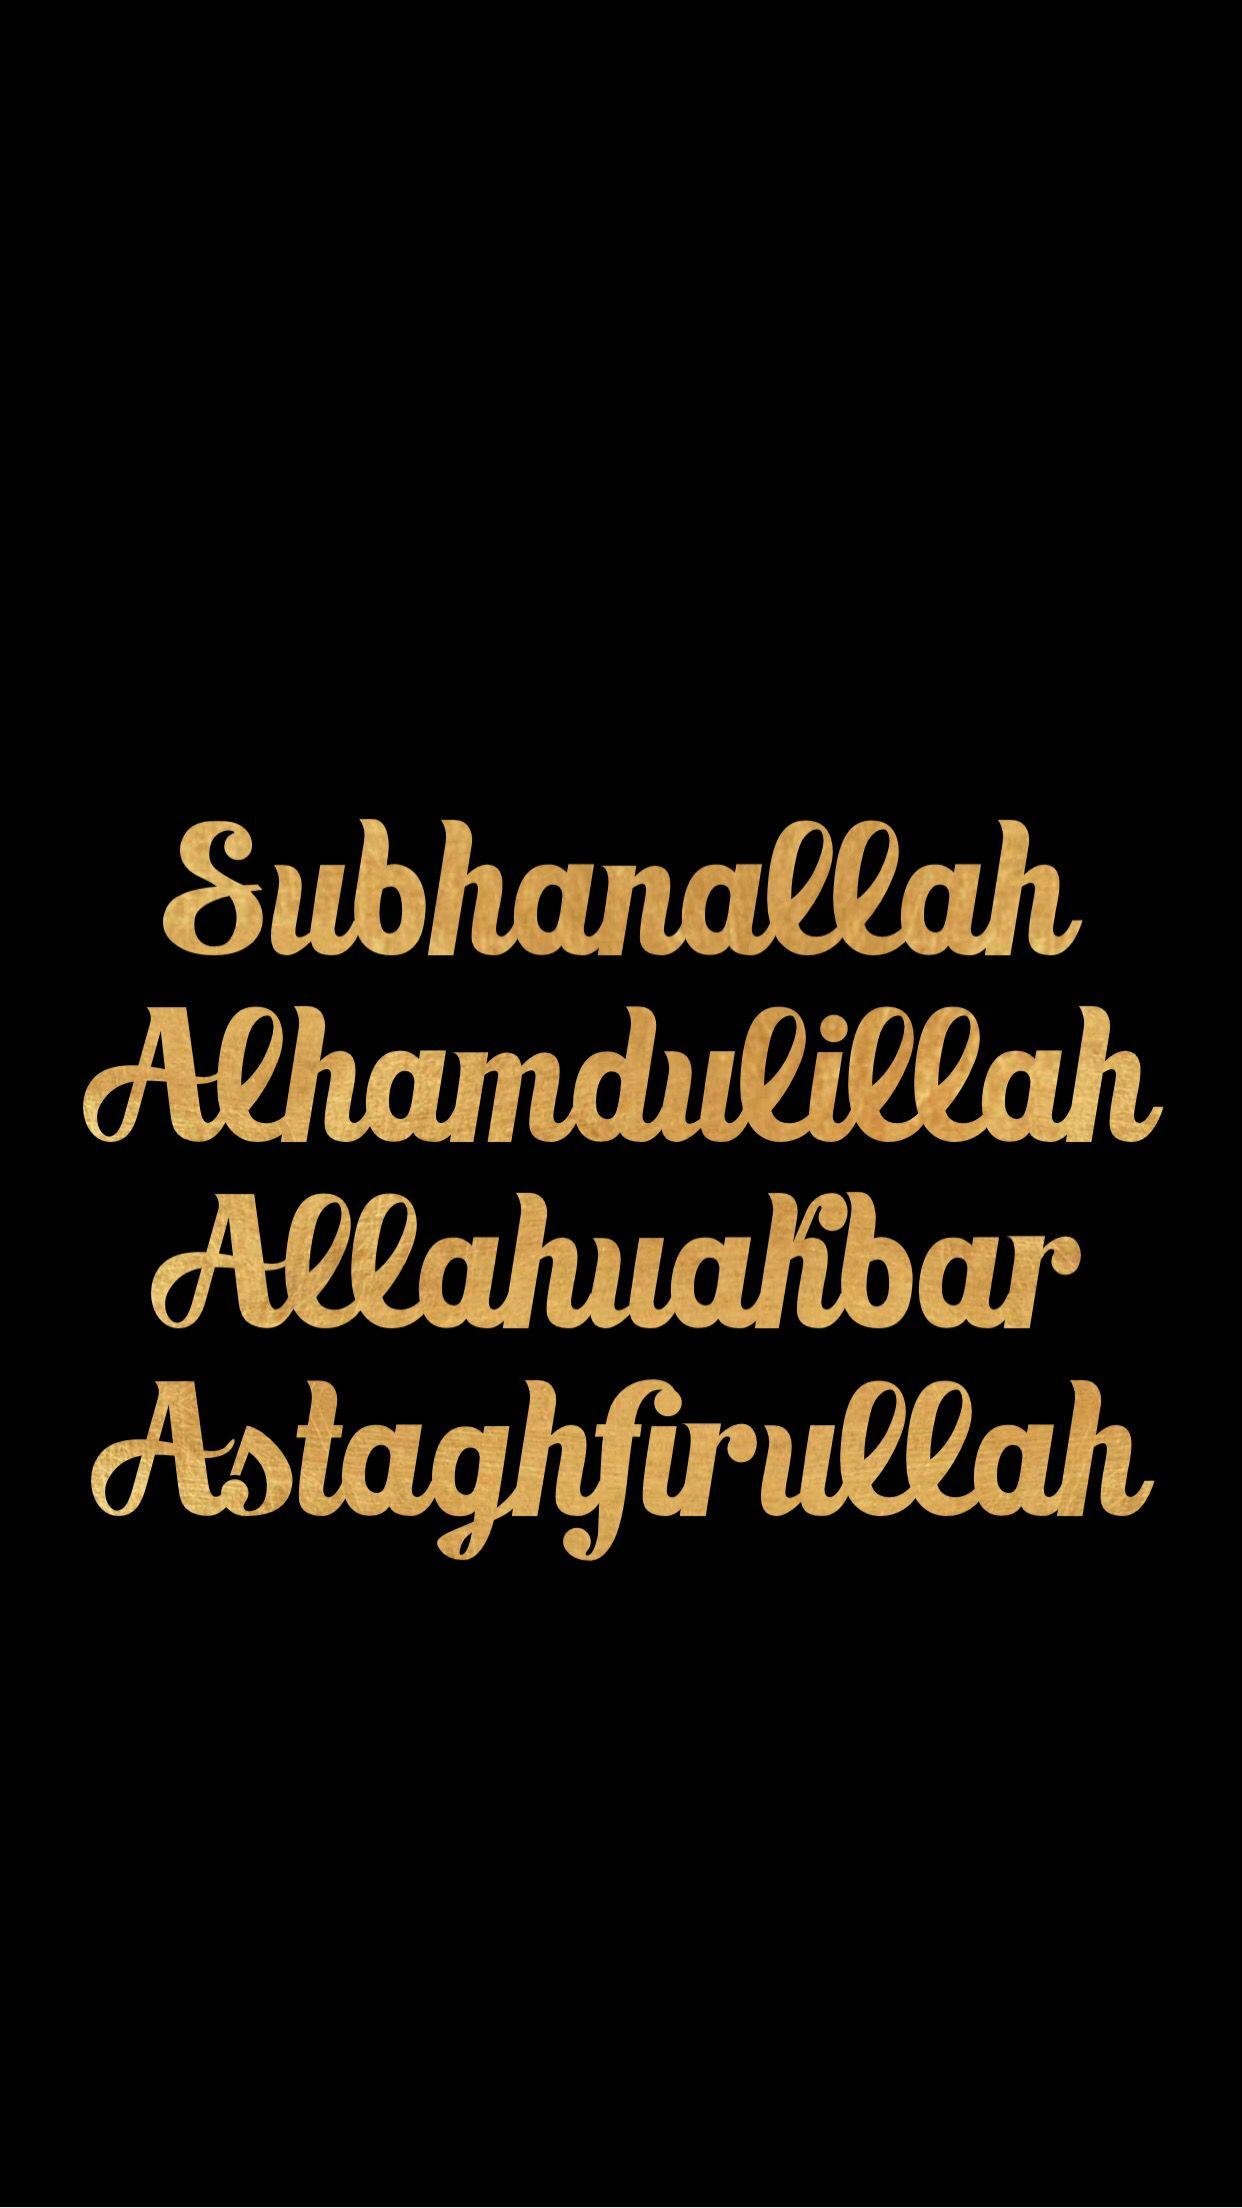 Download Alhamdulillah wallpaper by baryallaikarim  03  Free on ZEDGE  now Browse millions of   Islamic wallpaper iphone Islamic wallpaper hd  Quran wallpaper